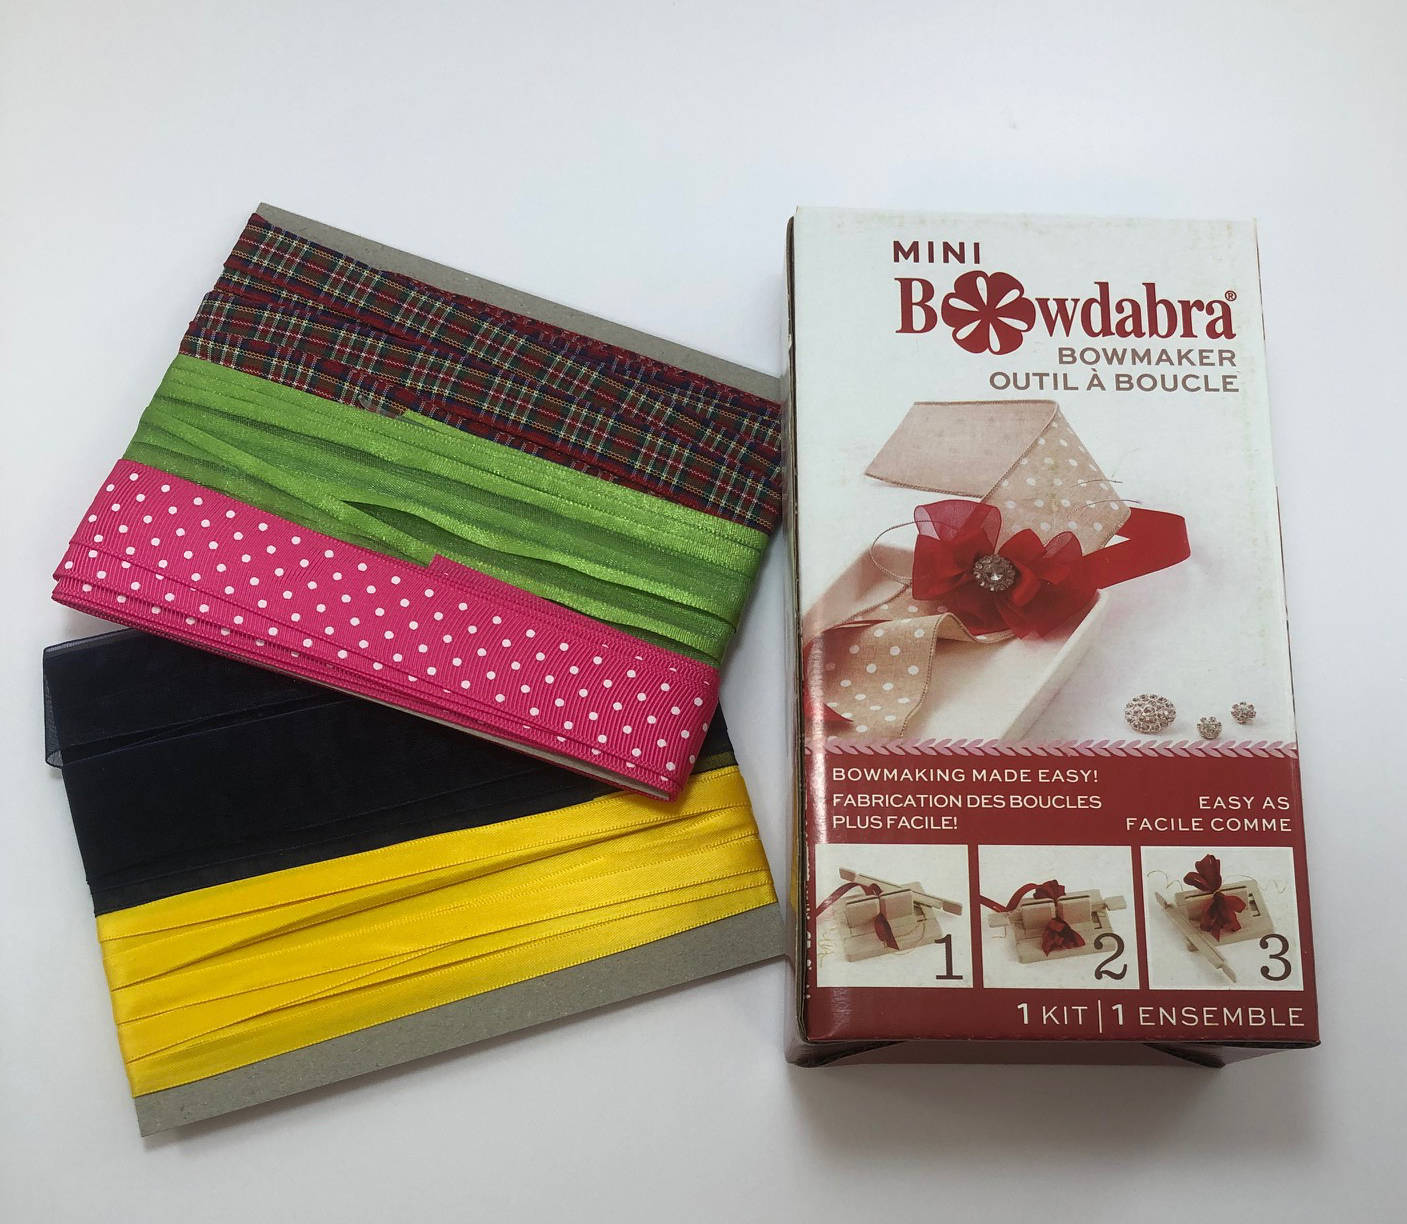 Darice Bowdabra bow maker and craft tool review - The Gadgeteer